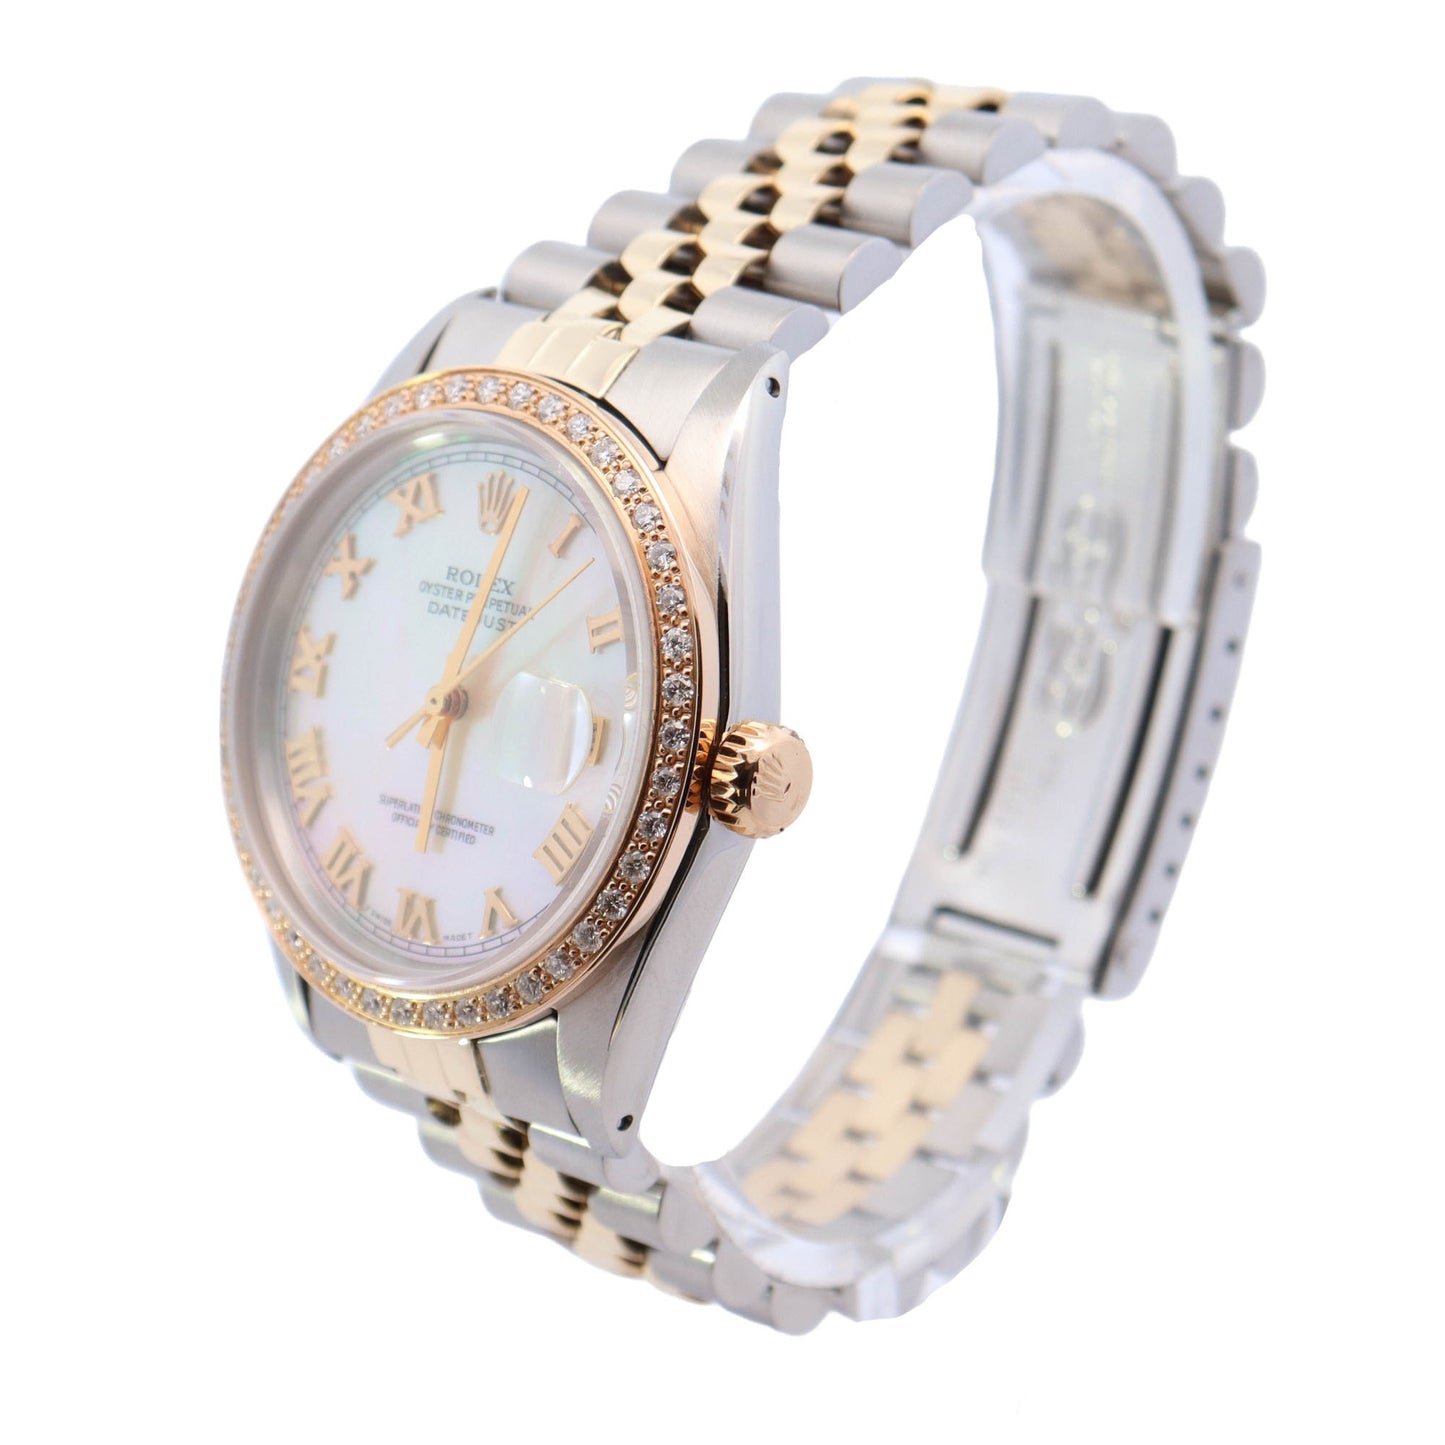 Rolex Datejust Yellow Gold & Stainless Steel Custom White MOP Roman Dial Watch Reference# 16013